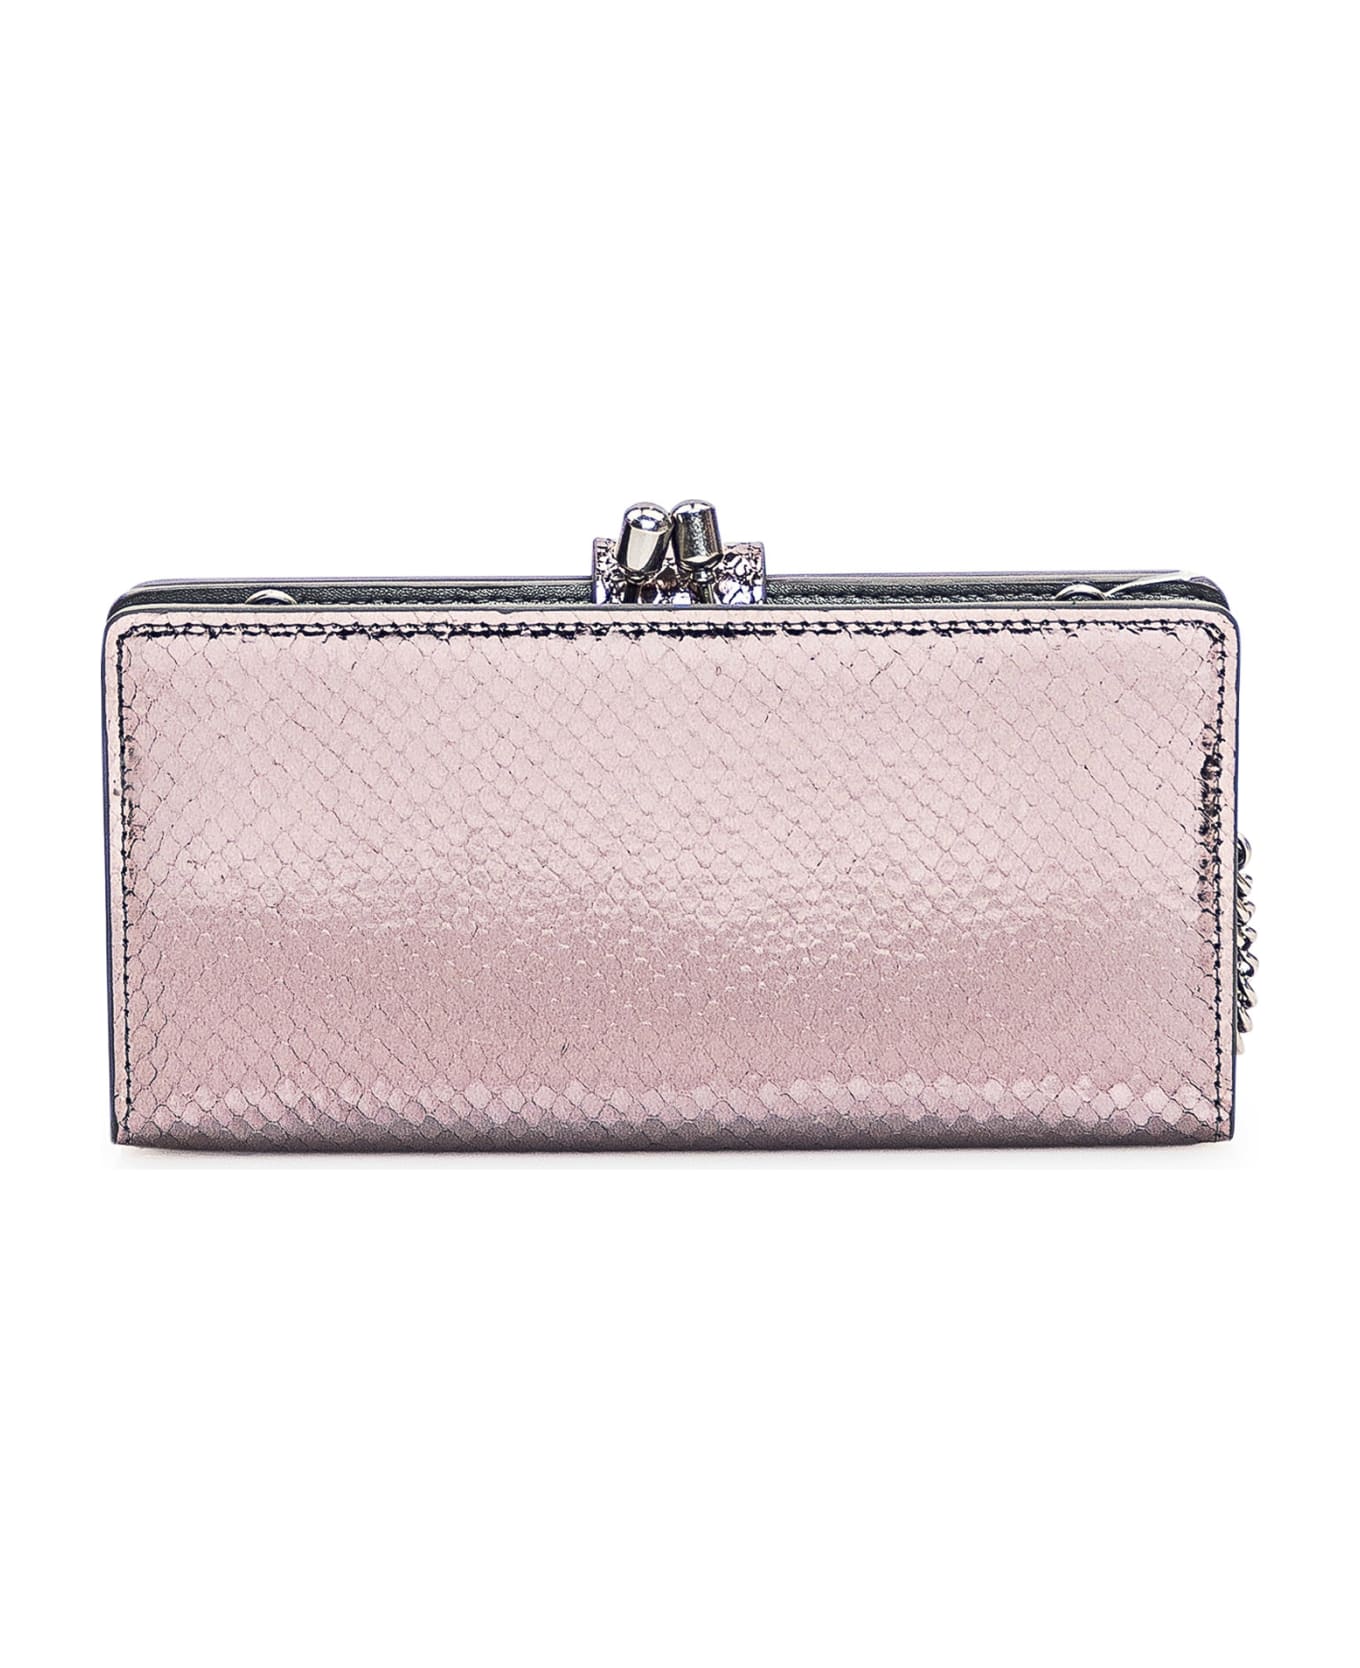 Pinko Wallet With Logo - ARGENTO SCURO-OLD SILVER